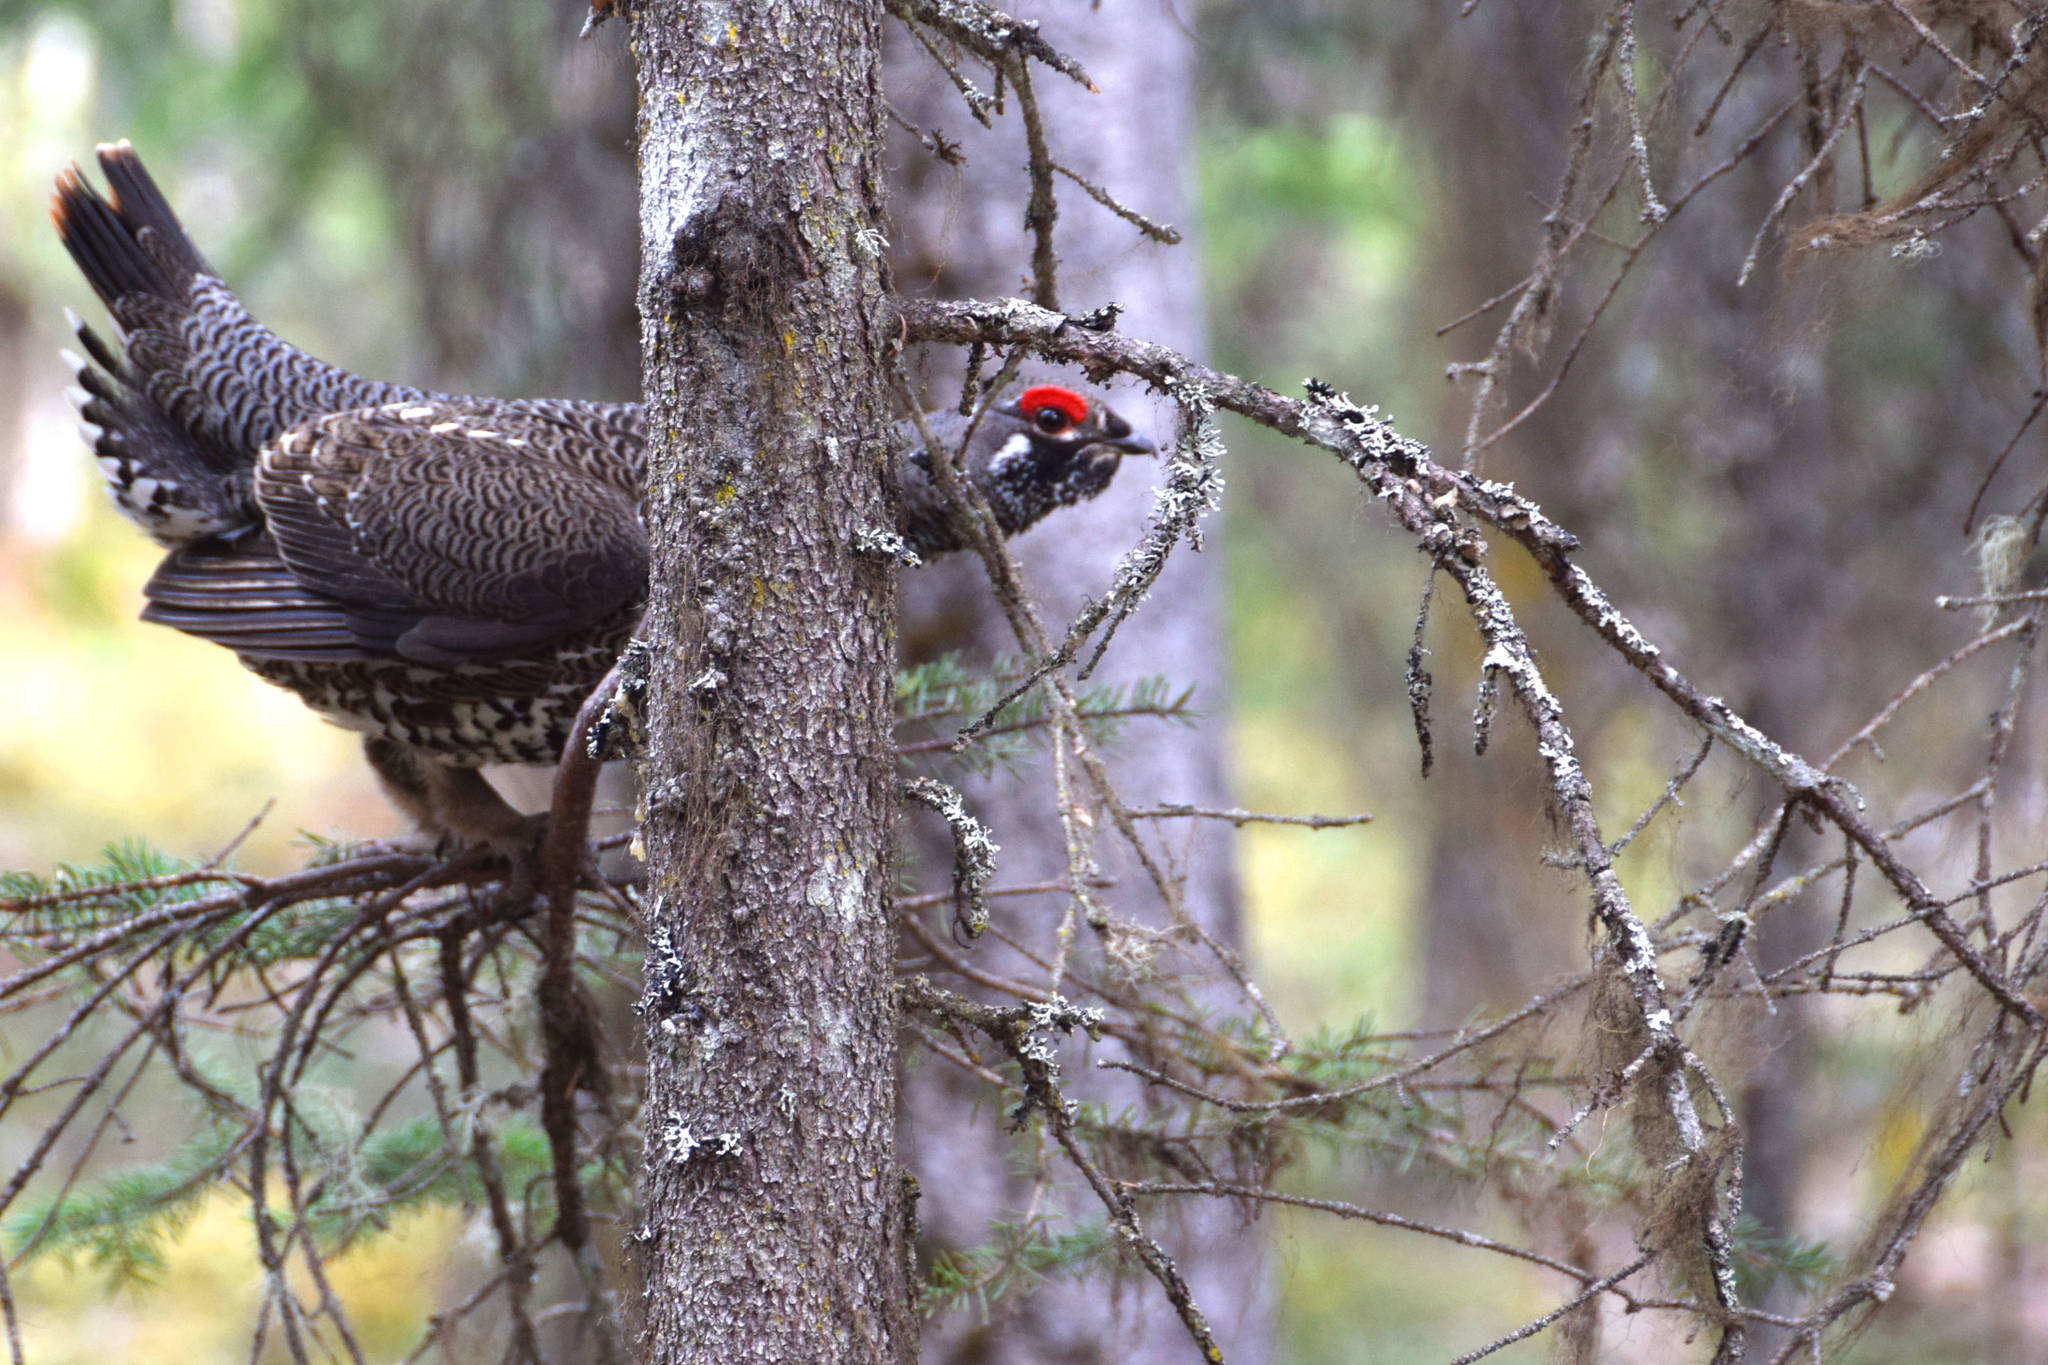 A spruce grouse, colloquially known as a “road chicken,” eyes the camera while perched along the Resurrection Pass Trail in Cooper Landing, Alaska, on April 29, 2019. (Photo by Brian Mazurek/Peninsula Clarion)